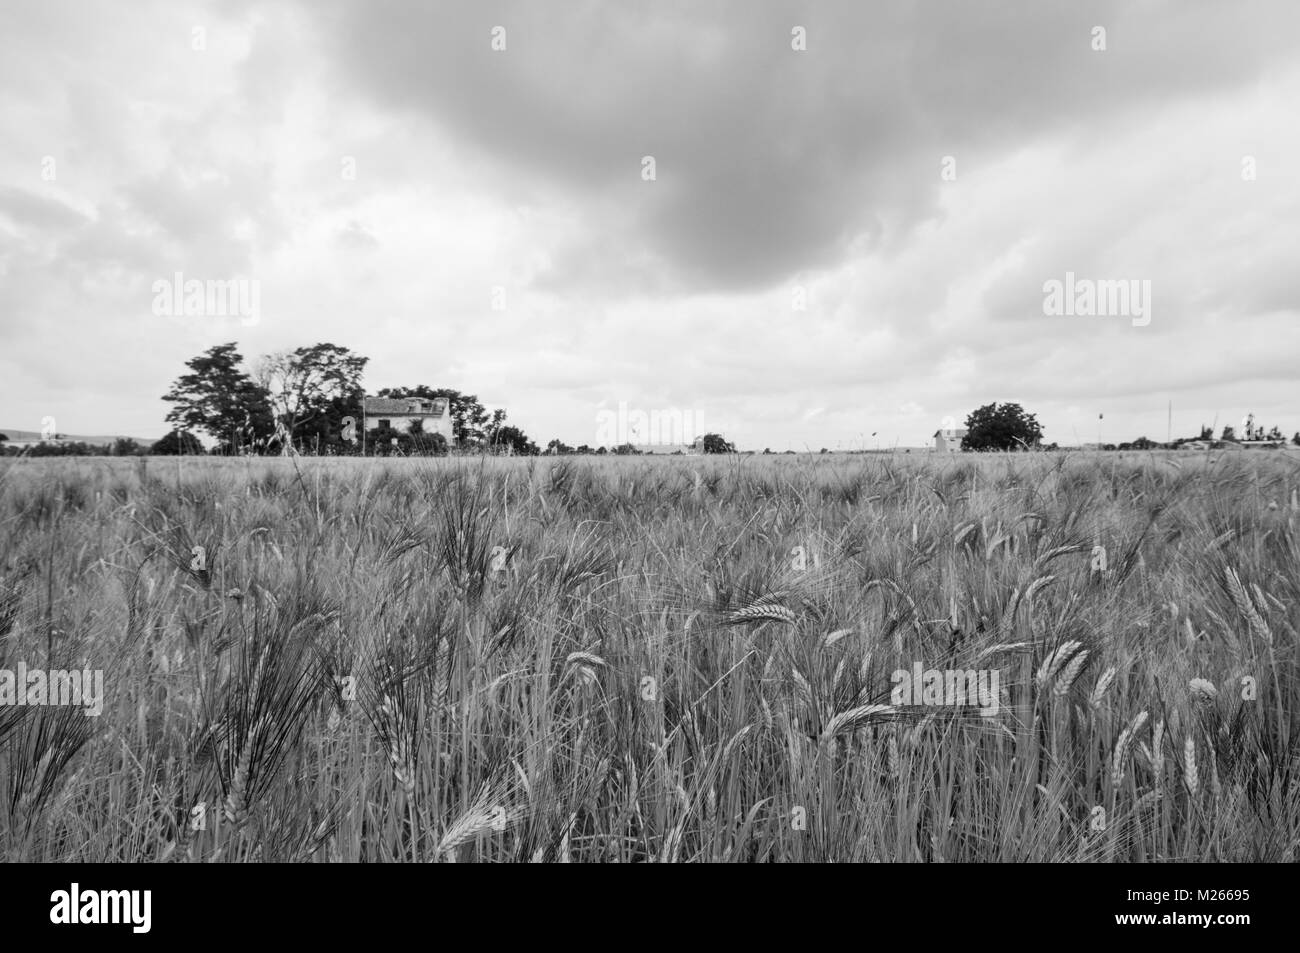 Cereal field in black and white Stock Photo